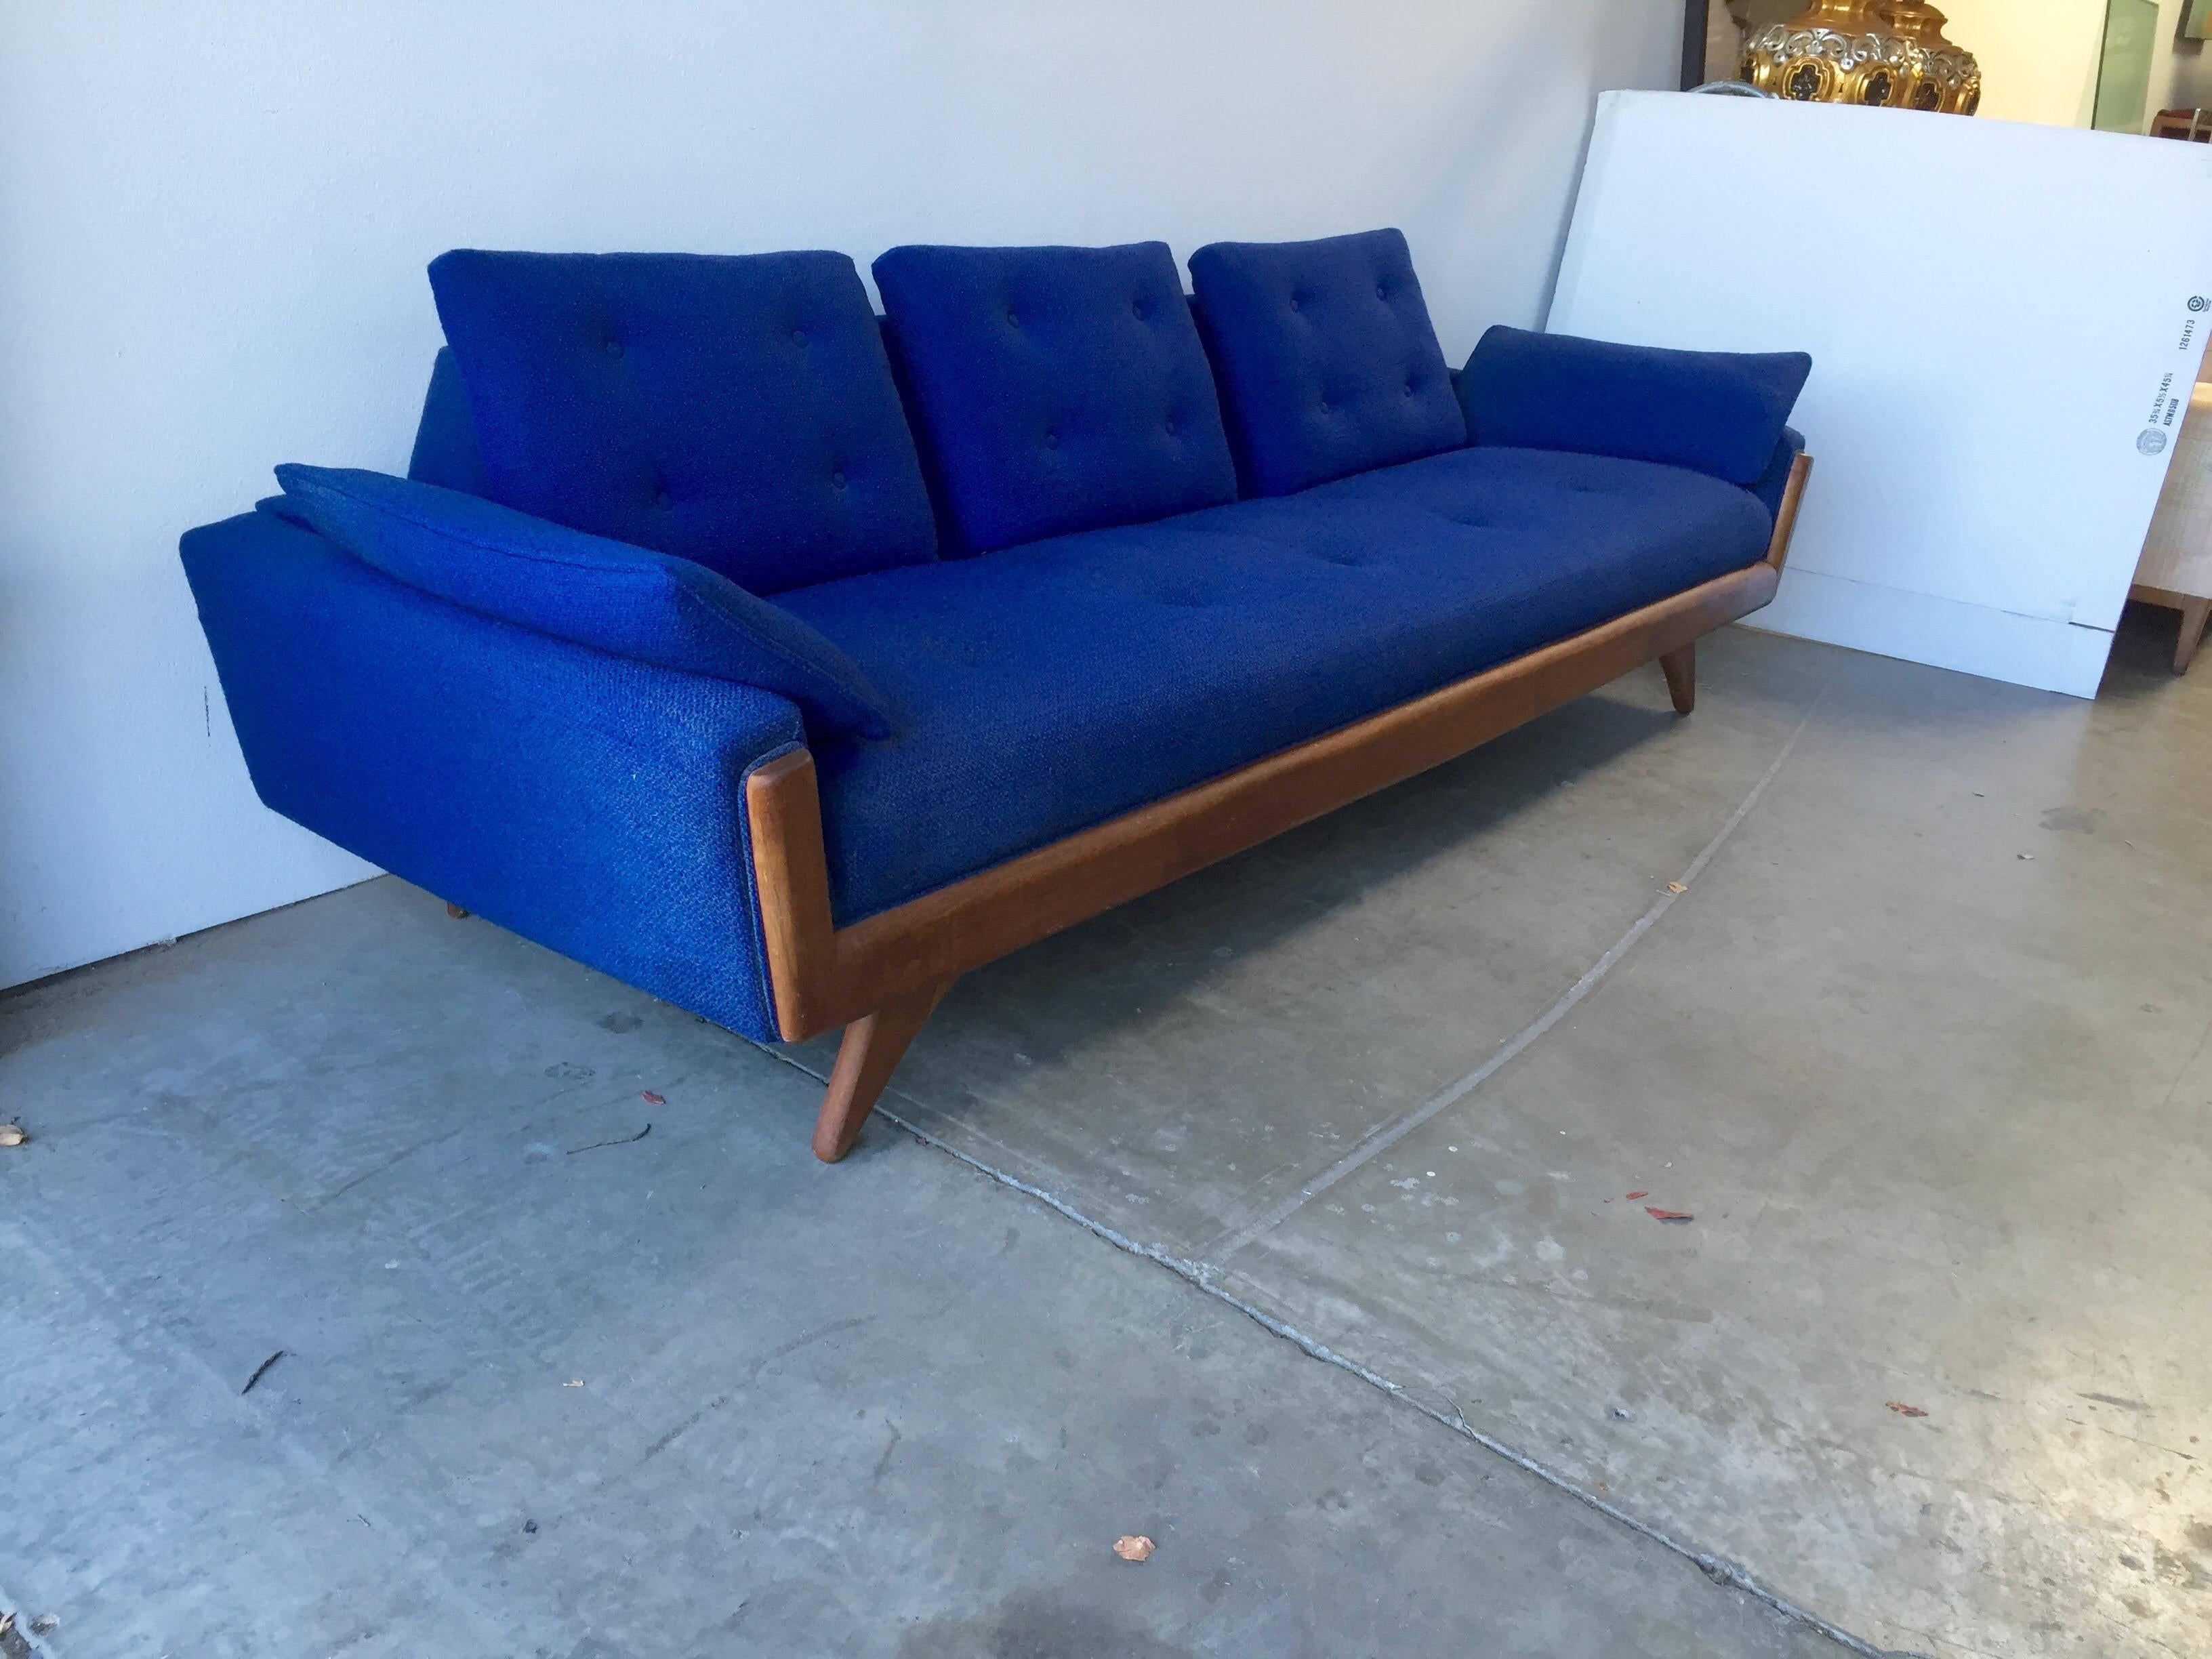 An utterly gorgeous, Classic, Mid-Century Modern Adrian Pearsall style sofa. Original fabric, with button cushions, indicative of the MCM style. Walnut base.